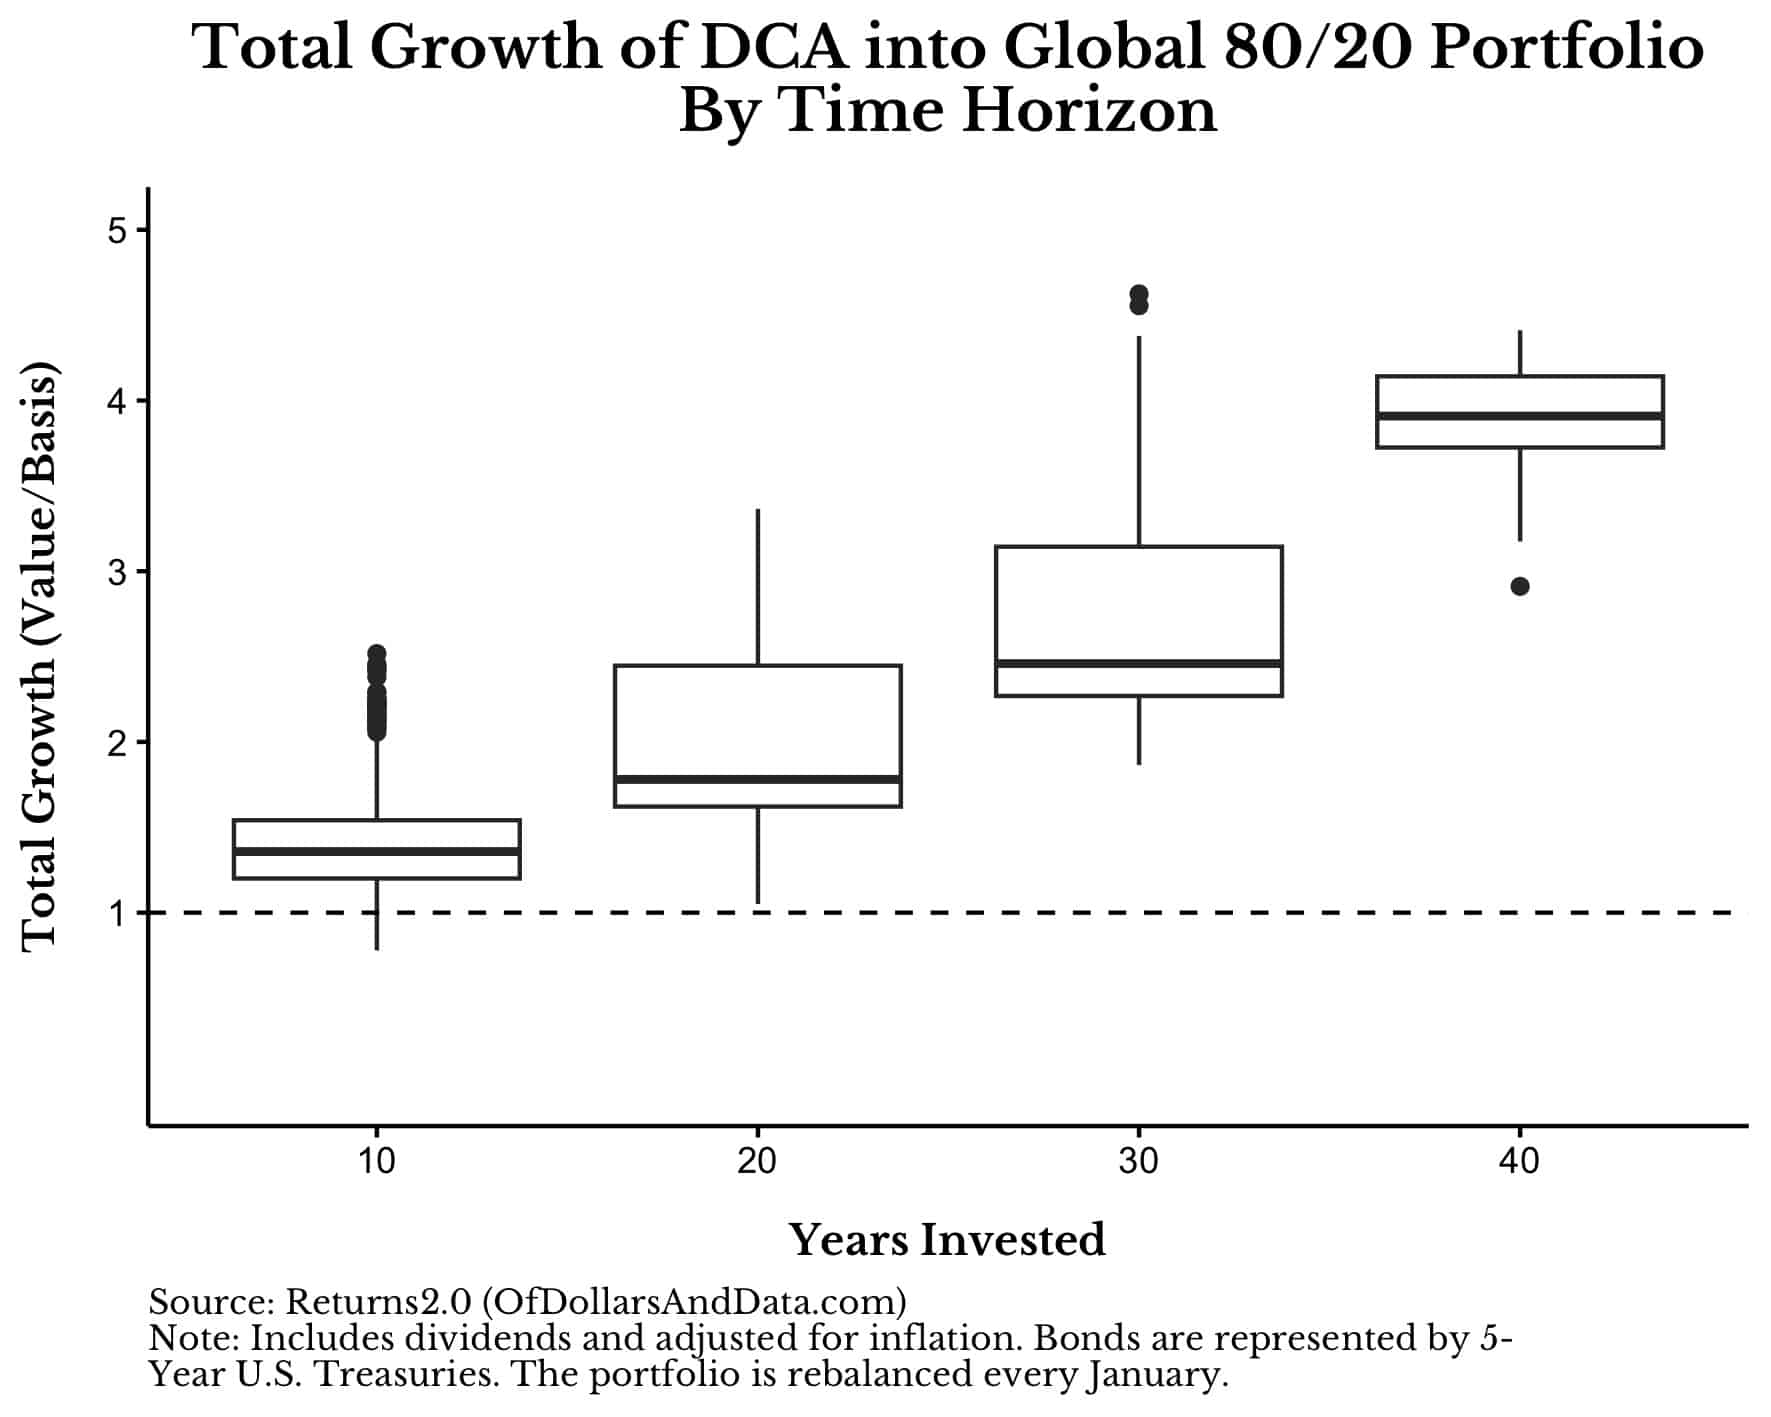 Boxplot of total growth of DCA investment into Global 80/20 portfolio for different time horizons.